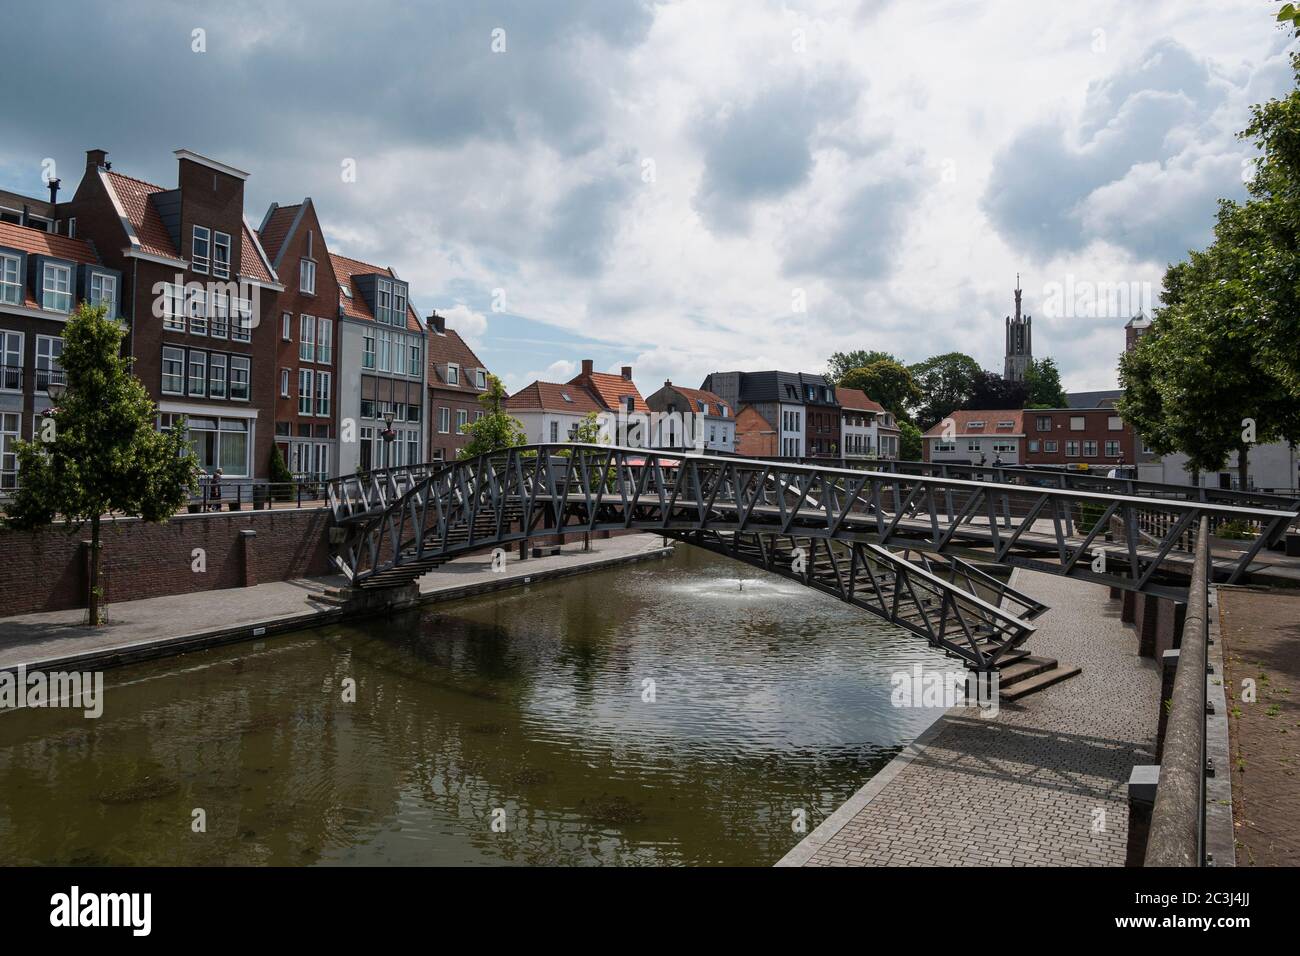 Hulst, the Netherlands June 20, 2020, Cityscape of the Historic fortified town of Hulst with the basilica in the background Stock Photo